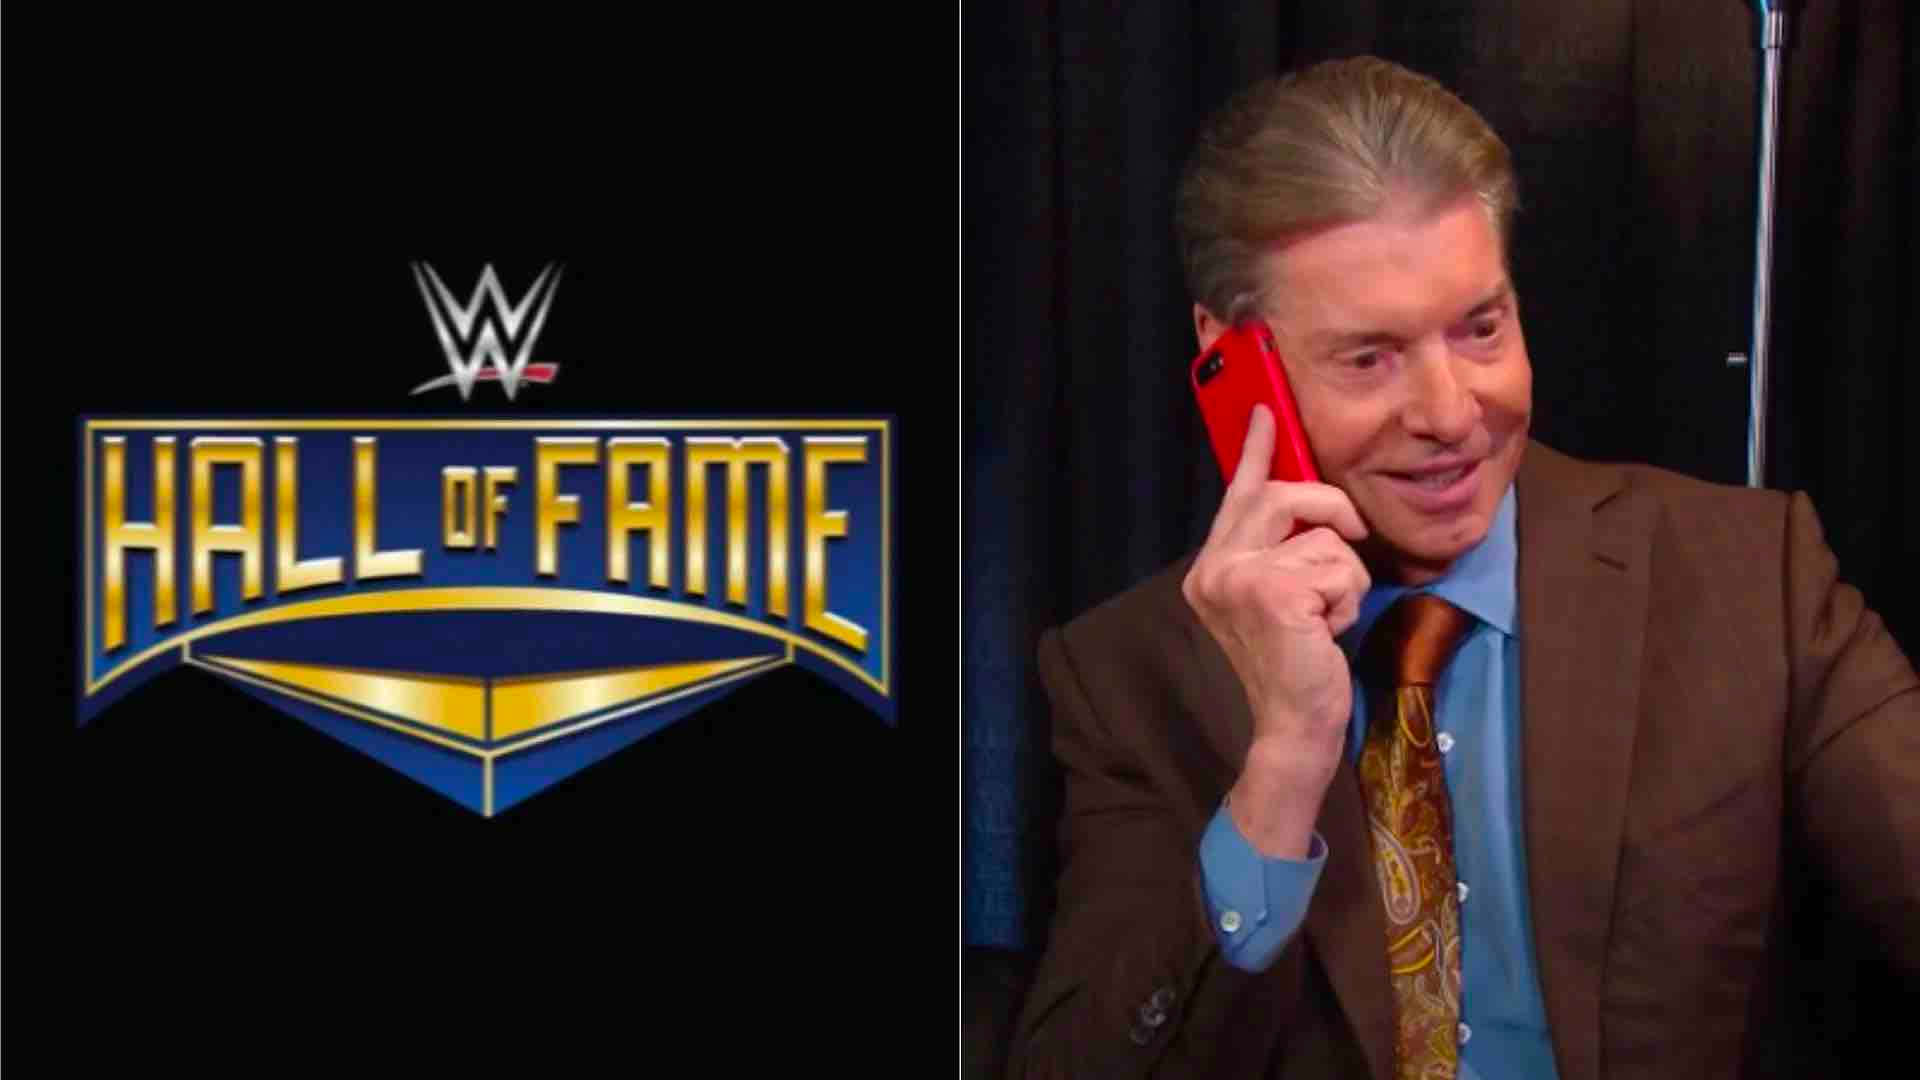 Wwe Ceo Vince Mcmahon Hall Of Fame Poster Background